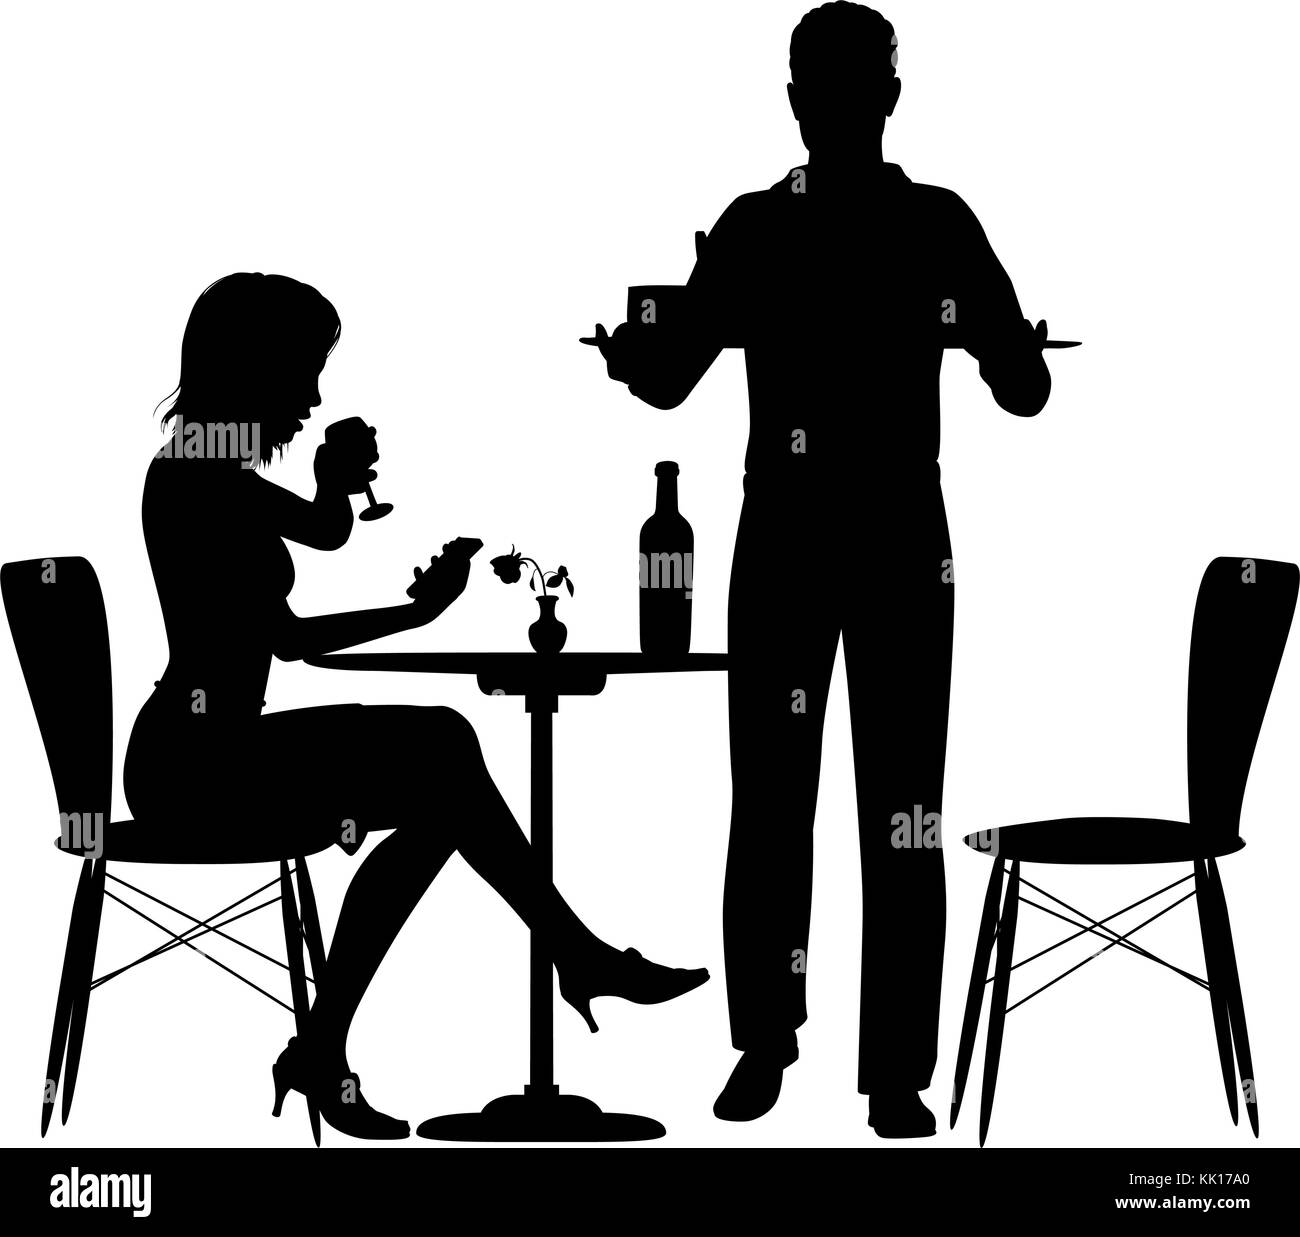 Editable vector illustration of a woman being served food by a man who could be a waiter or her partner with elements as separate objects Stock Vector